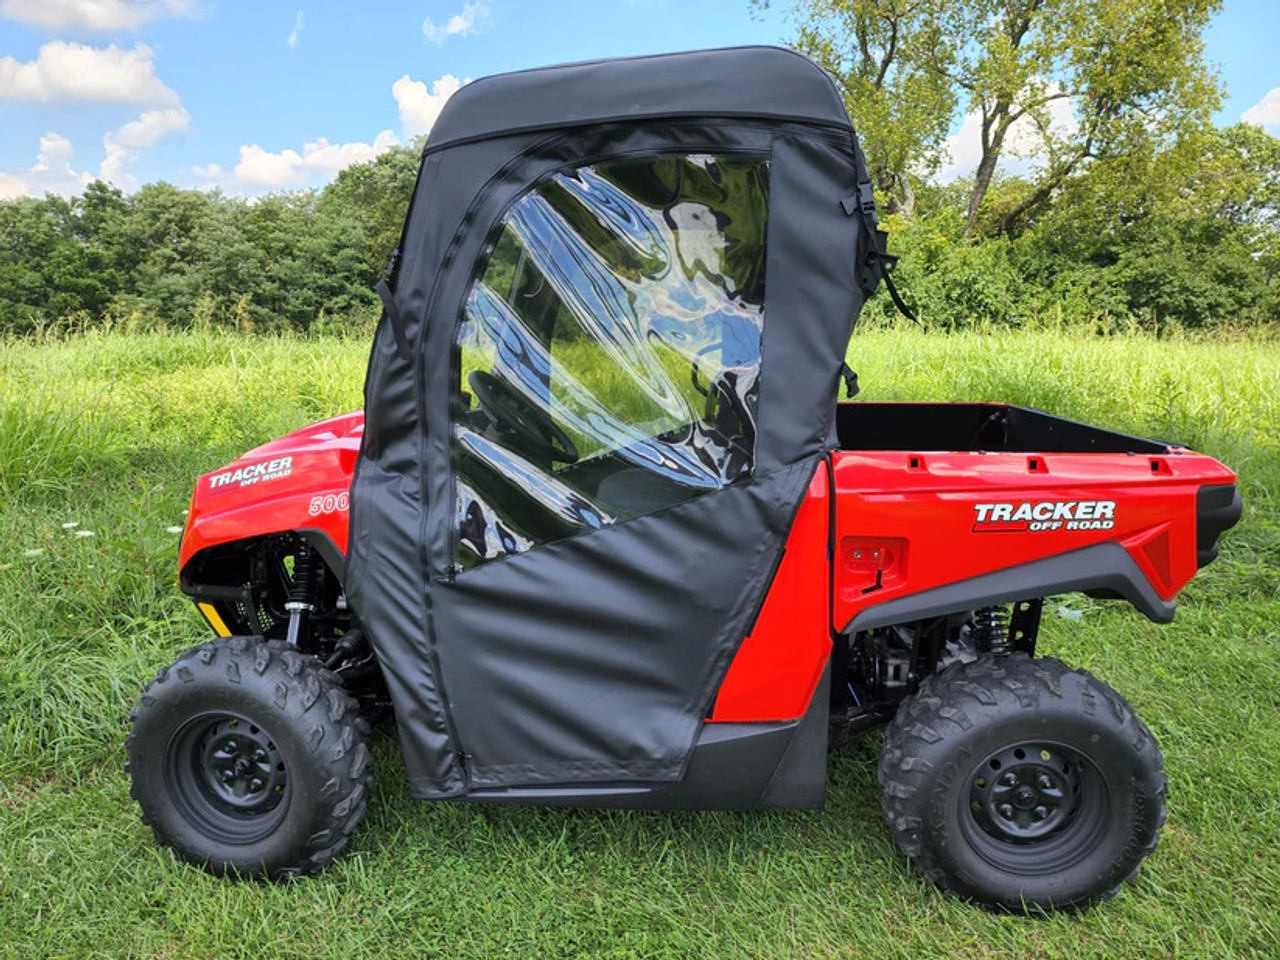 3 Star side x side Arctic Cat Prowler Tracker 500 doors and rear window side view